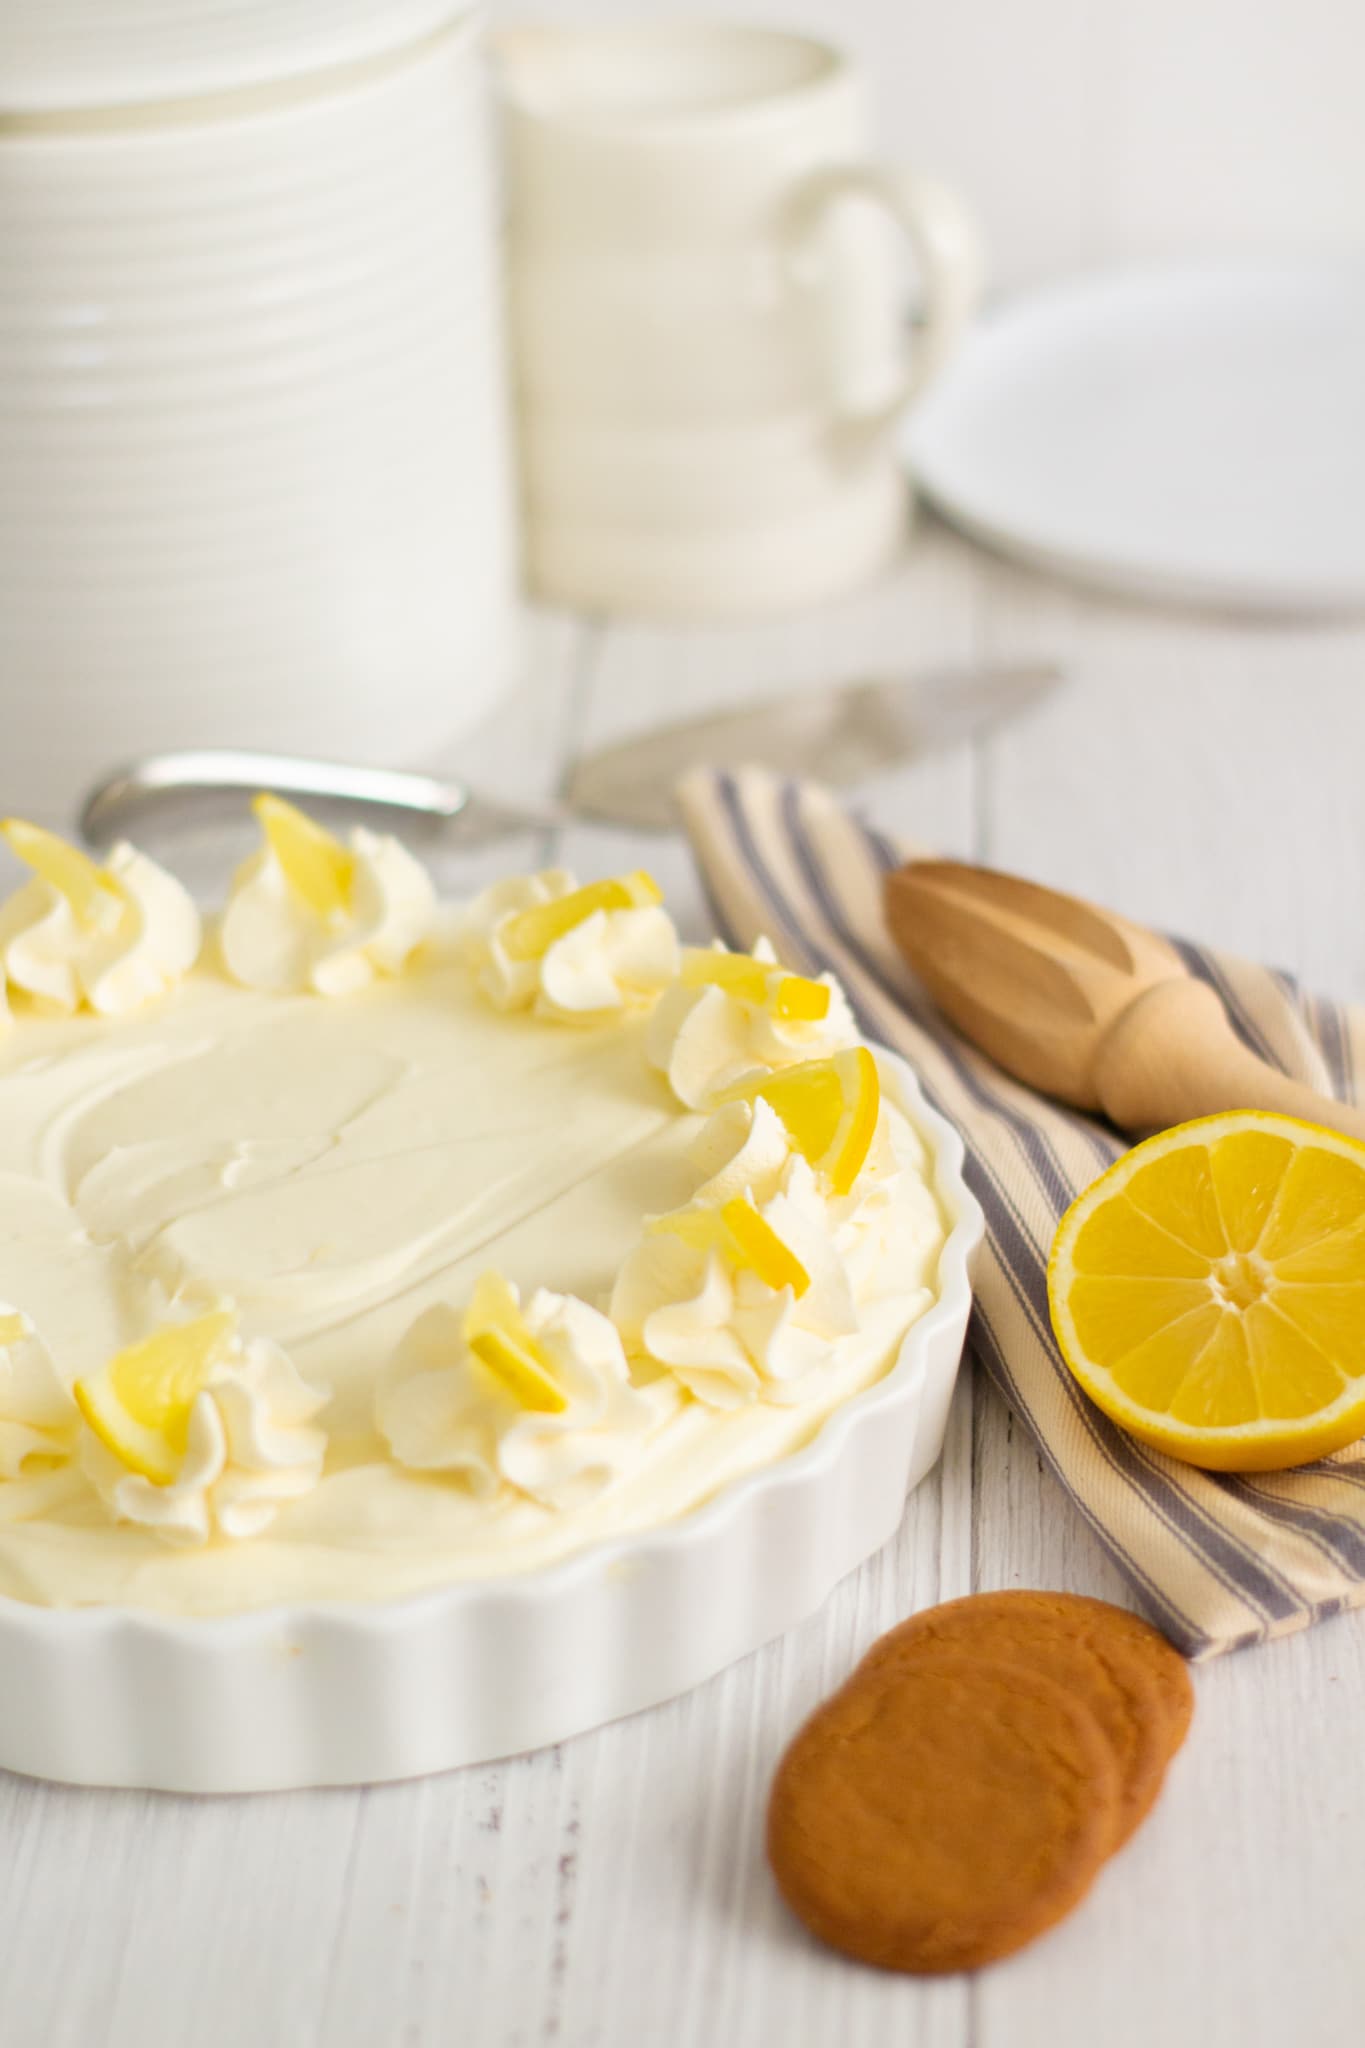 lemon cheesecake in a white dish with ginger nut biscuits in the foreground and a lemon juicer and half a lemon on top of a grey striped napkin